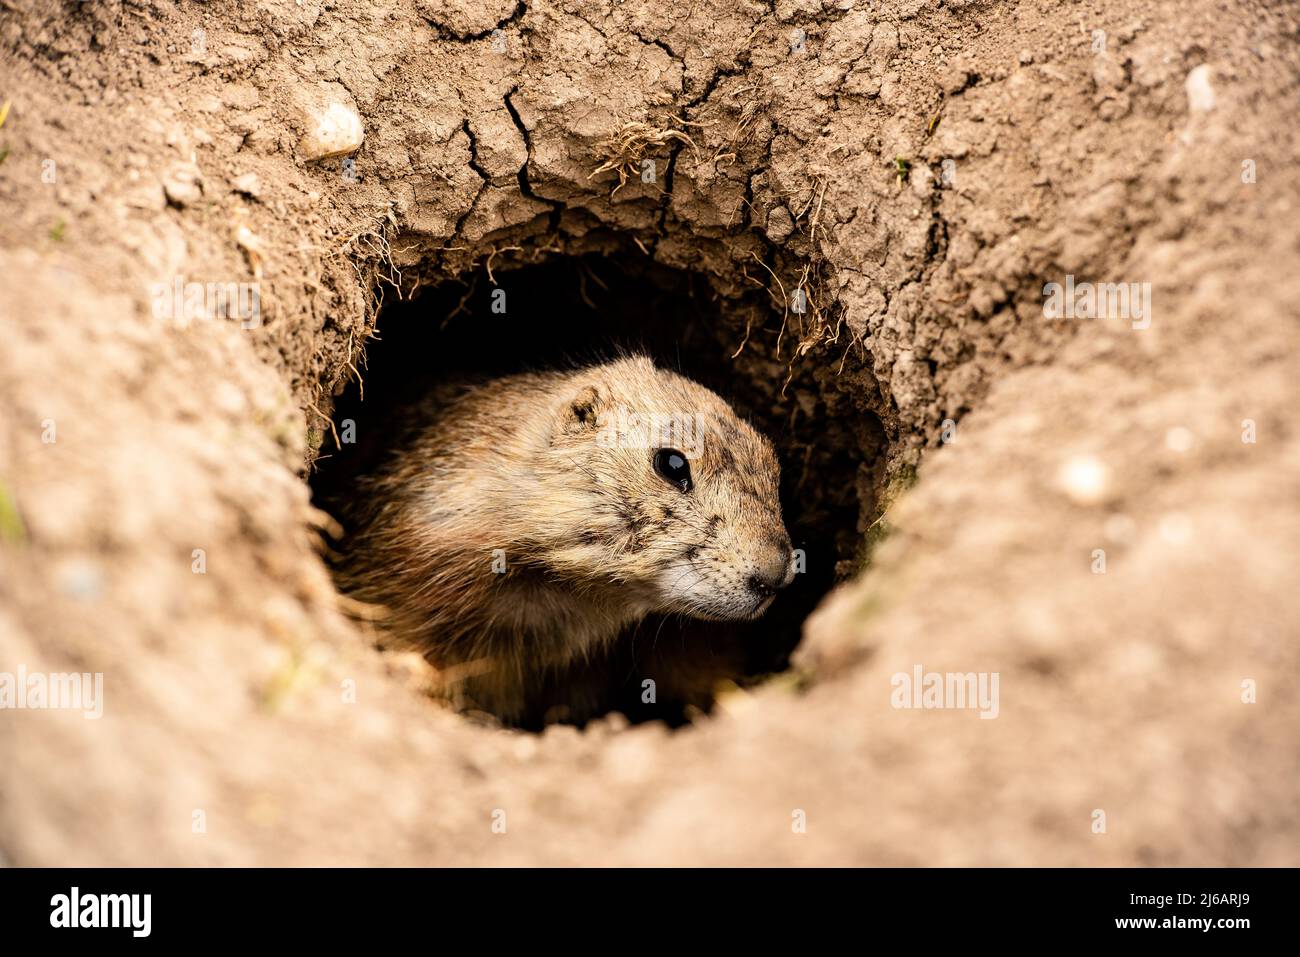 Close up Prairie Dog peeking out of burrow hole in Badlands National Park, South Dakota, small rodent on guard looking out for predators, colony watch Stock Photo